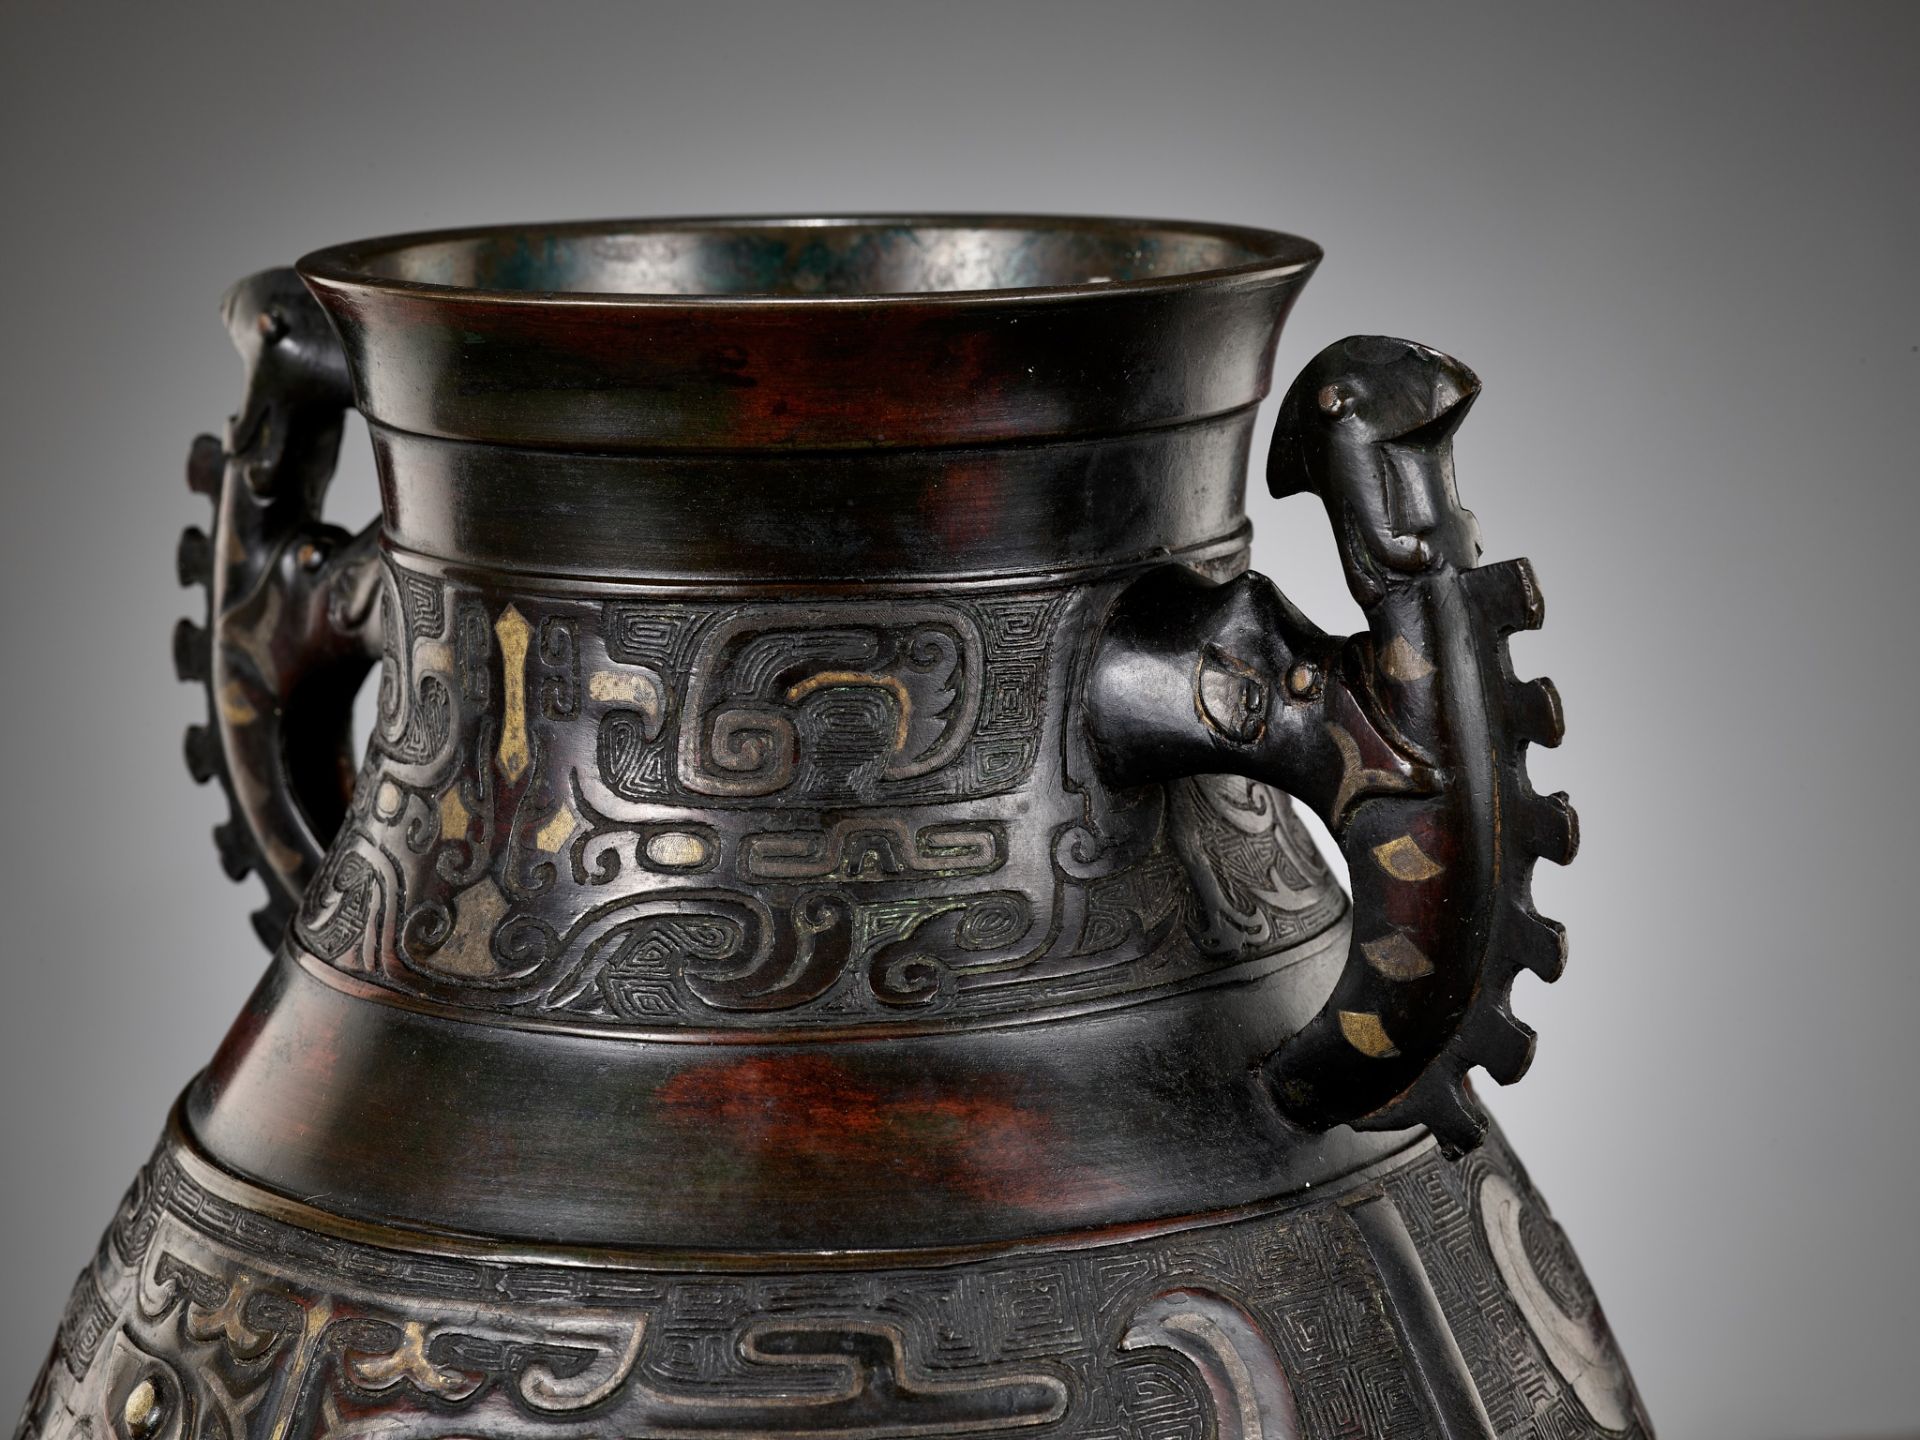 A LARGE ARCHAISTIC GOLD AND SILVER-INLAID BRONZE VASE, HU, QING DYNASTY - Image 12 of 14